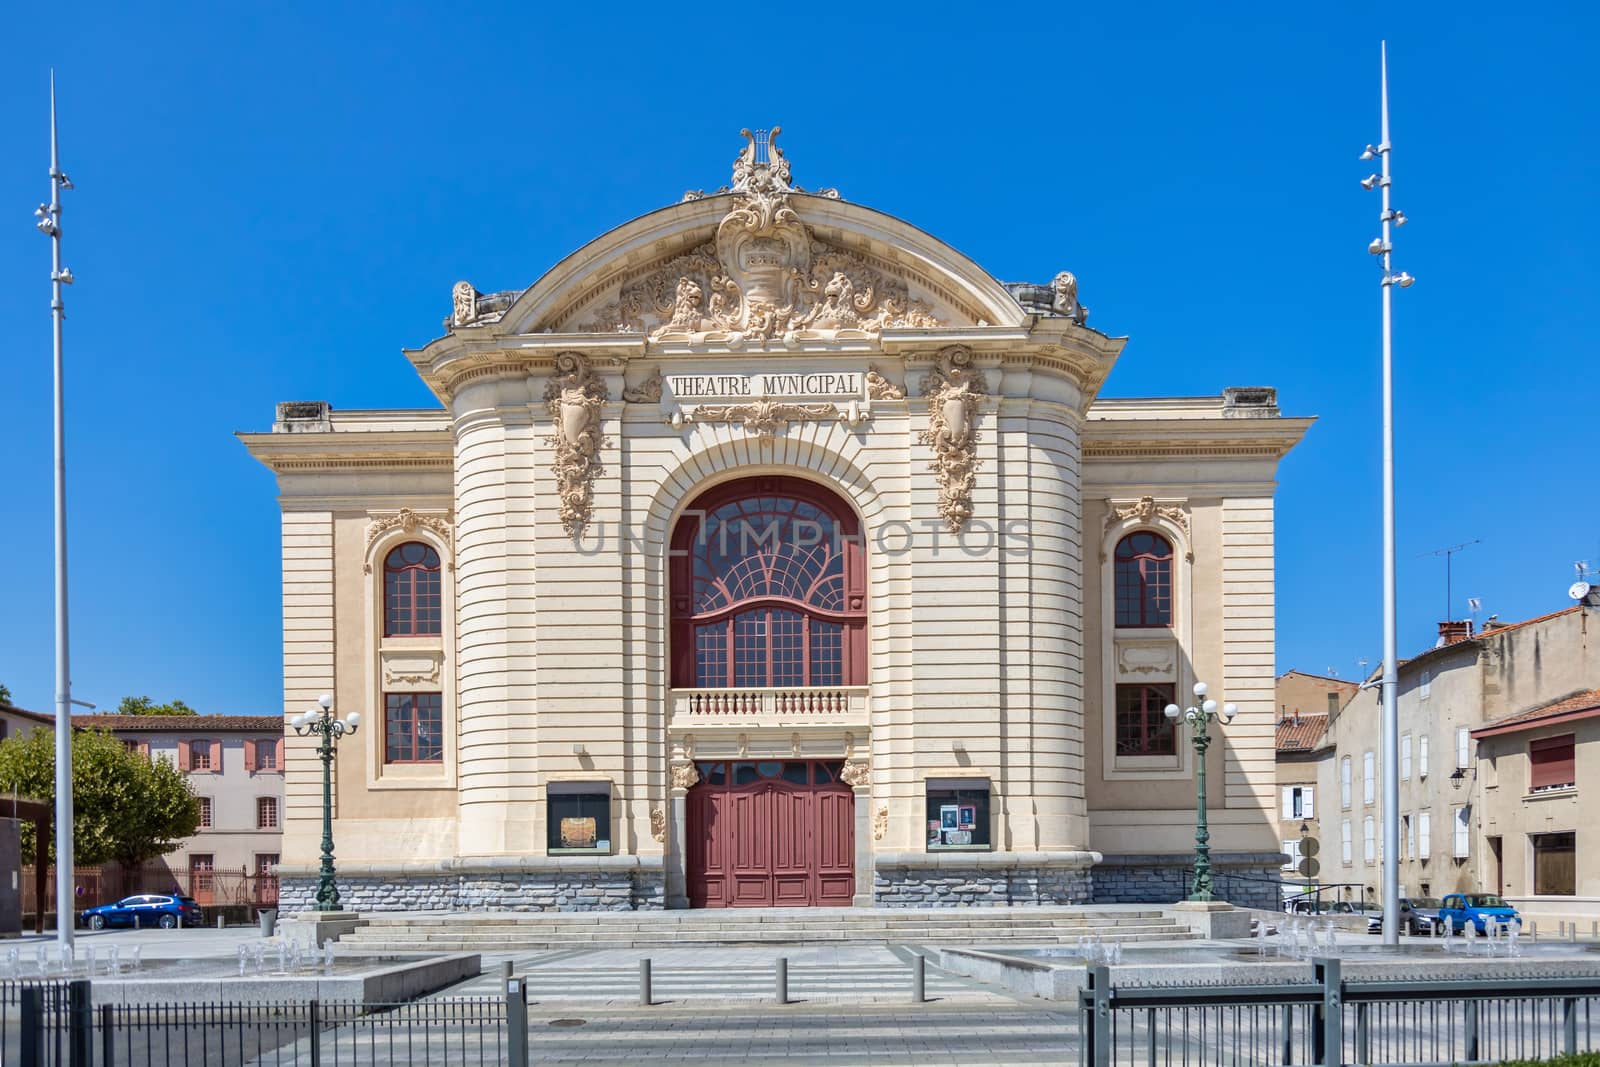 Municipal theater in old town Castres in France by Digoarpi